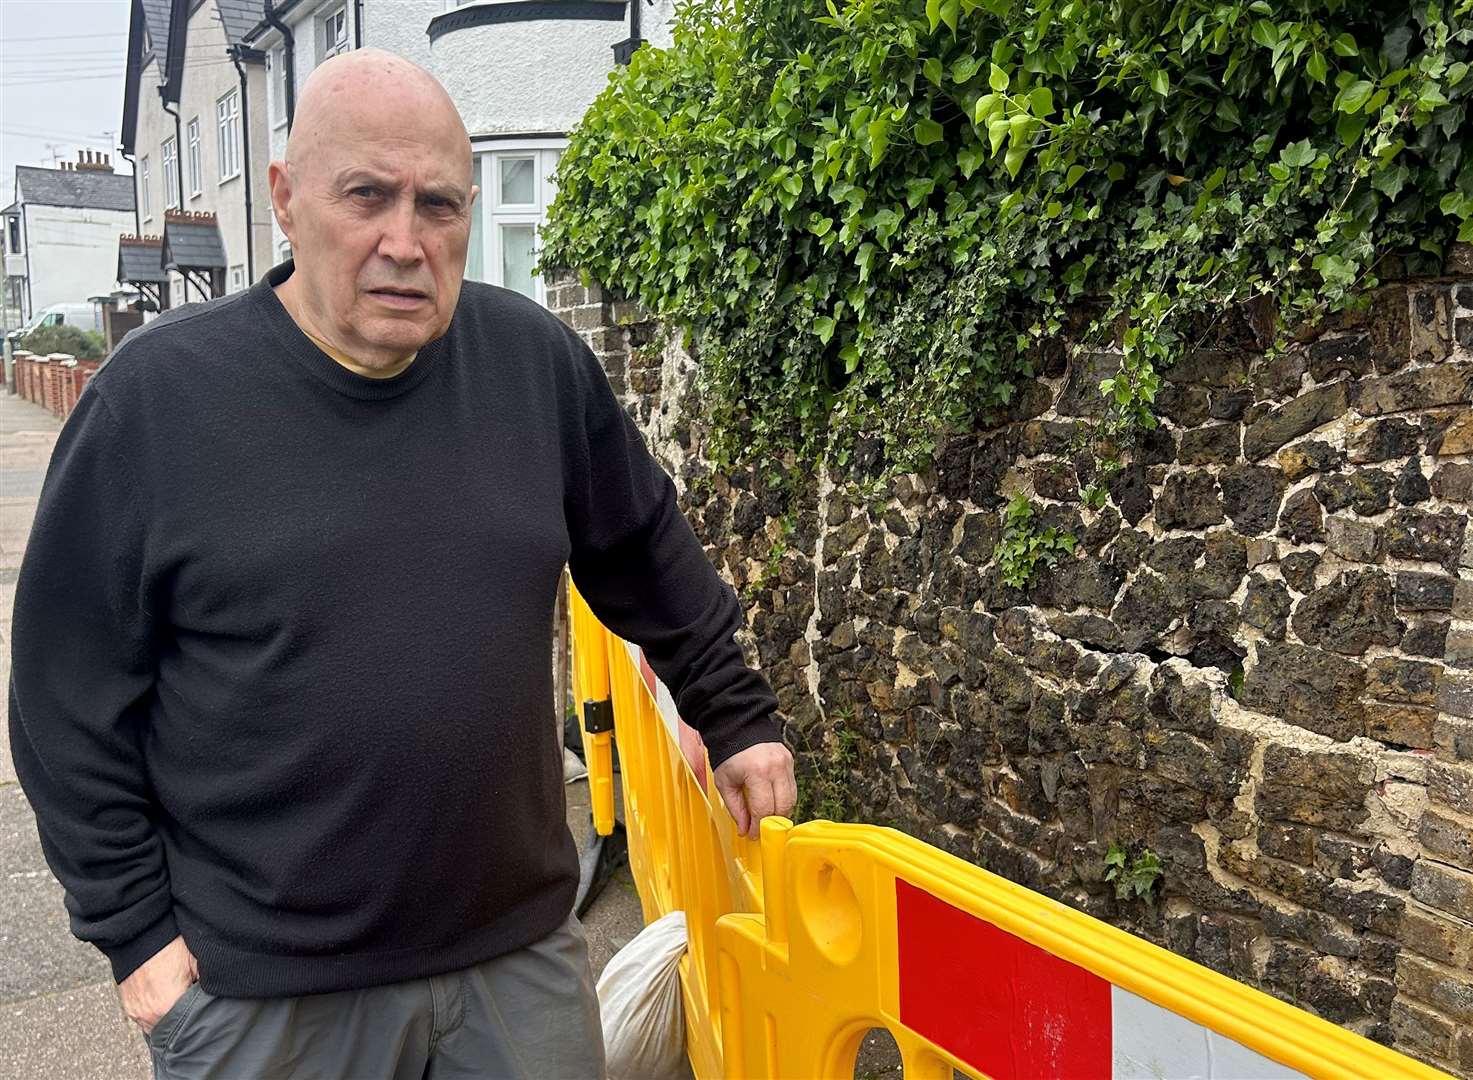 William Dordoy, 76, worries the wall may fall over and injure children on their way to school in Herne Bay